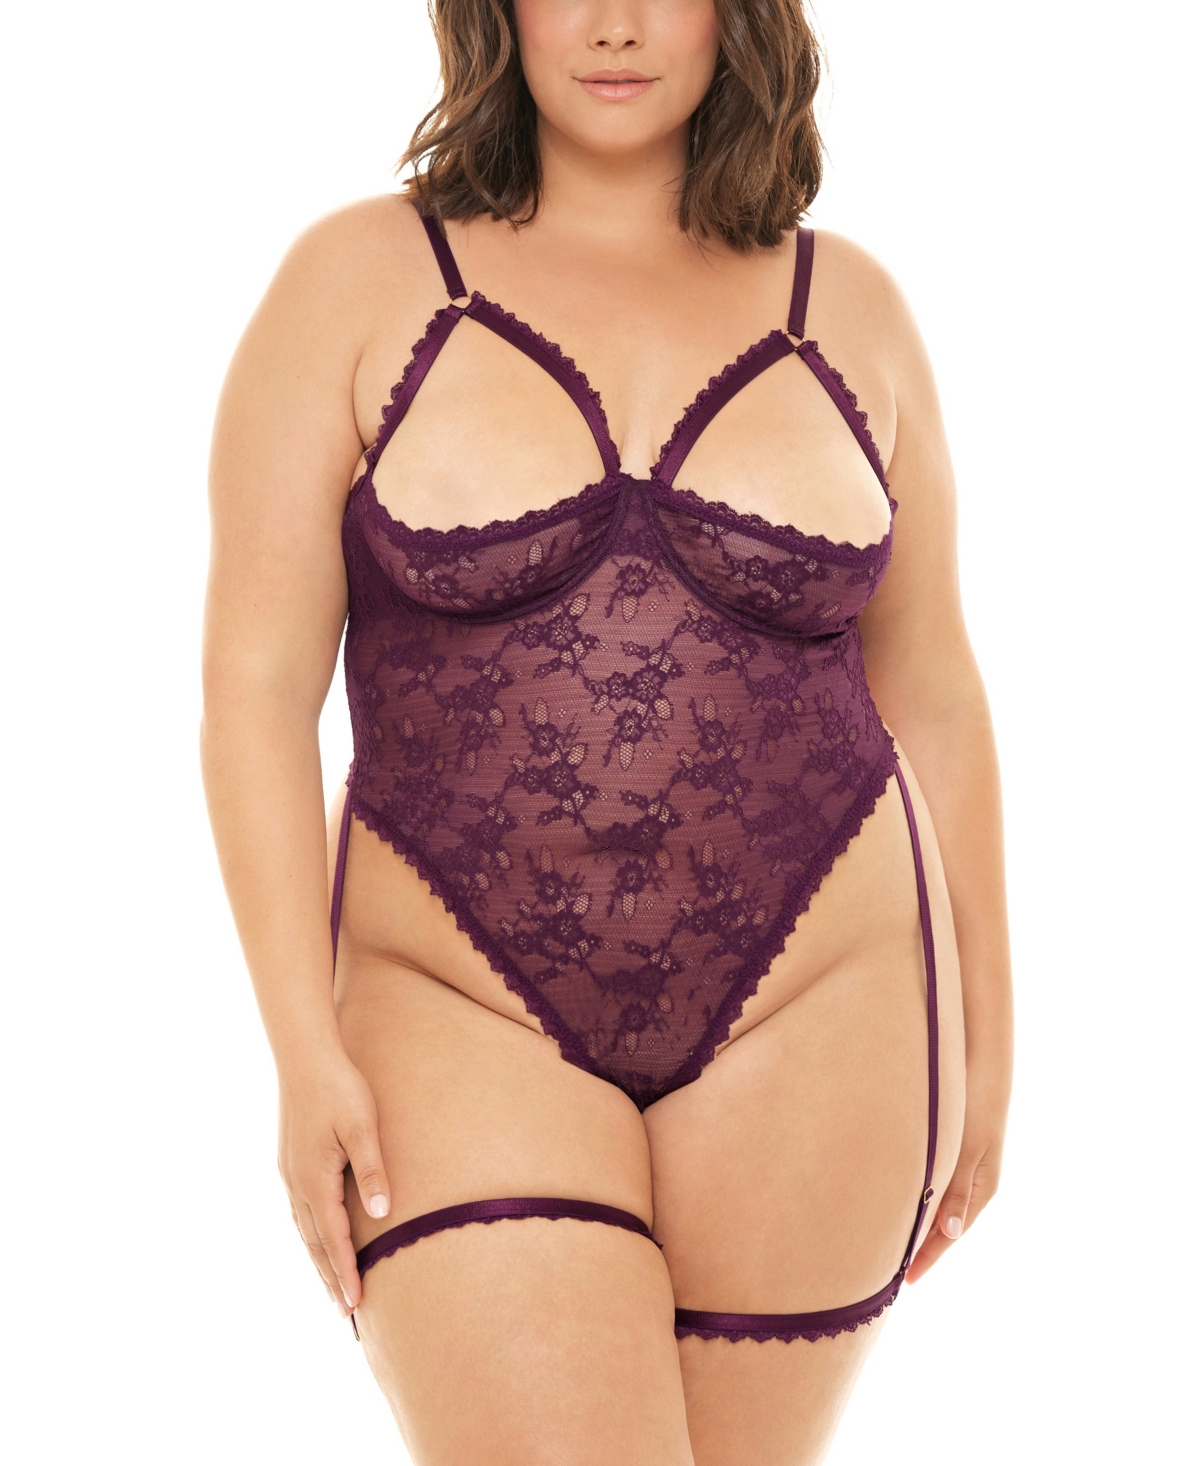 Plus Size Elayne Open Shelf Cup Teddy with Open Gusset and Garter Stays - Potent Purple